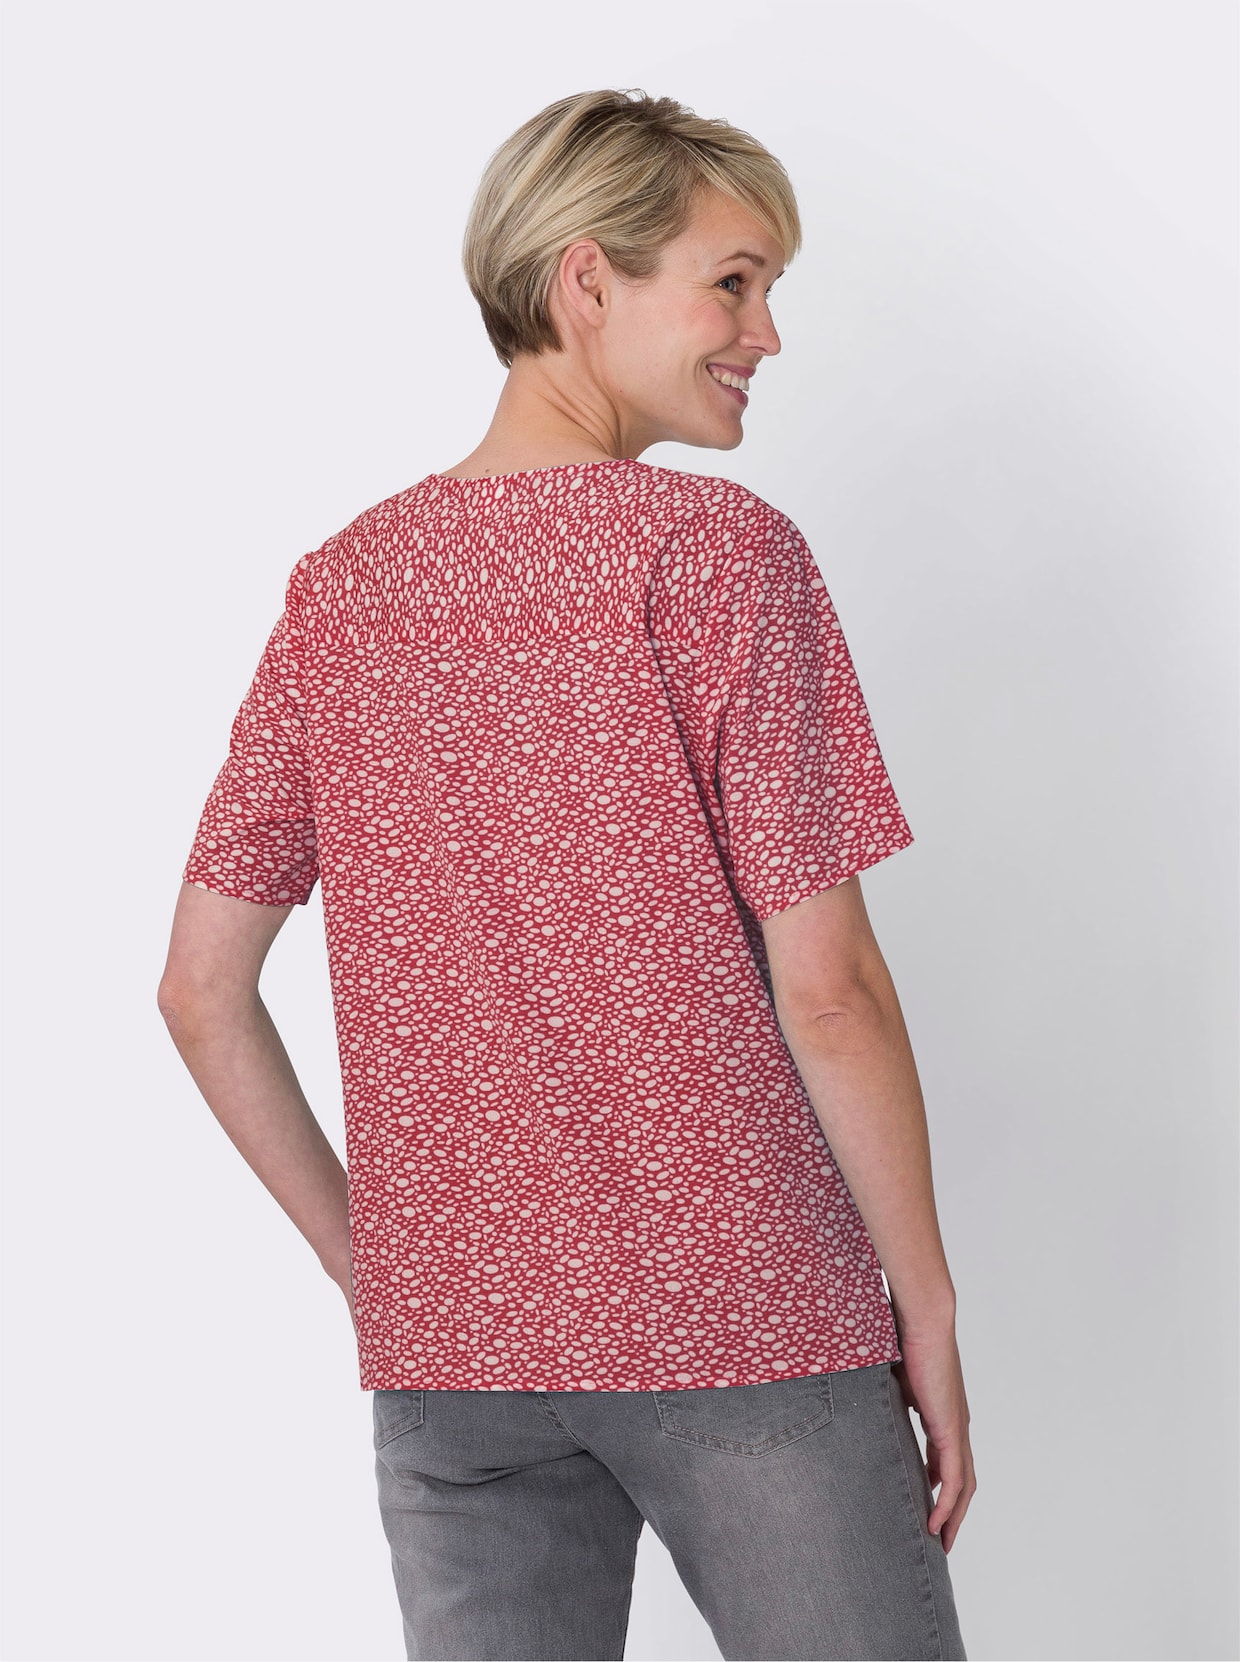 Comfortabele blouse - rood/wit geprint